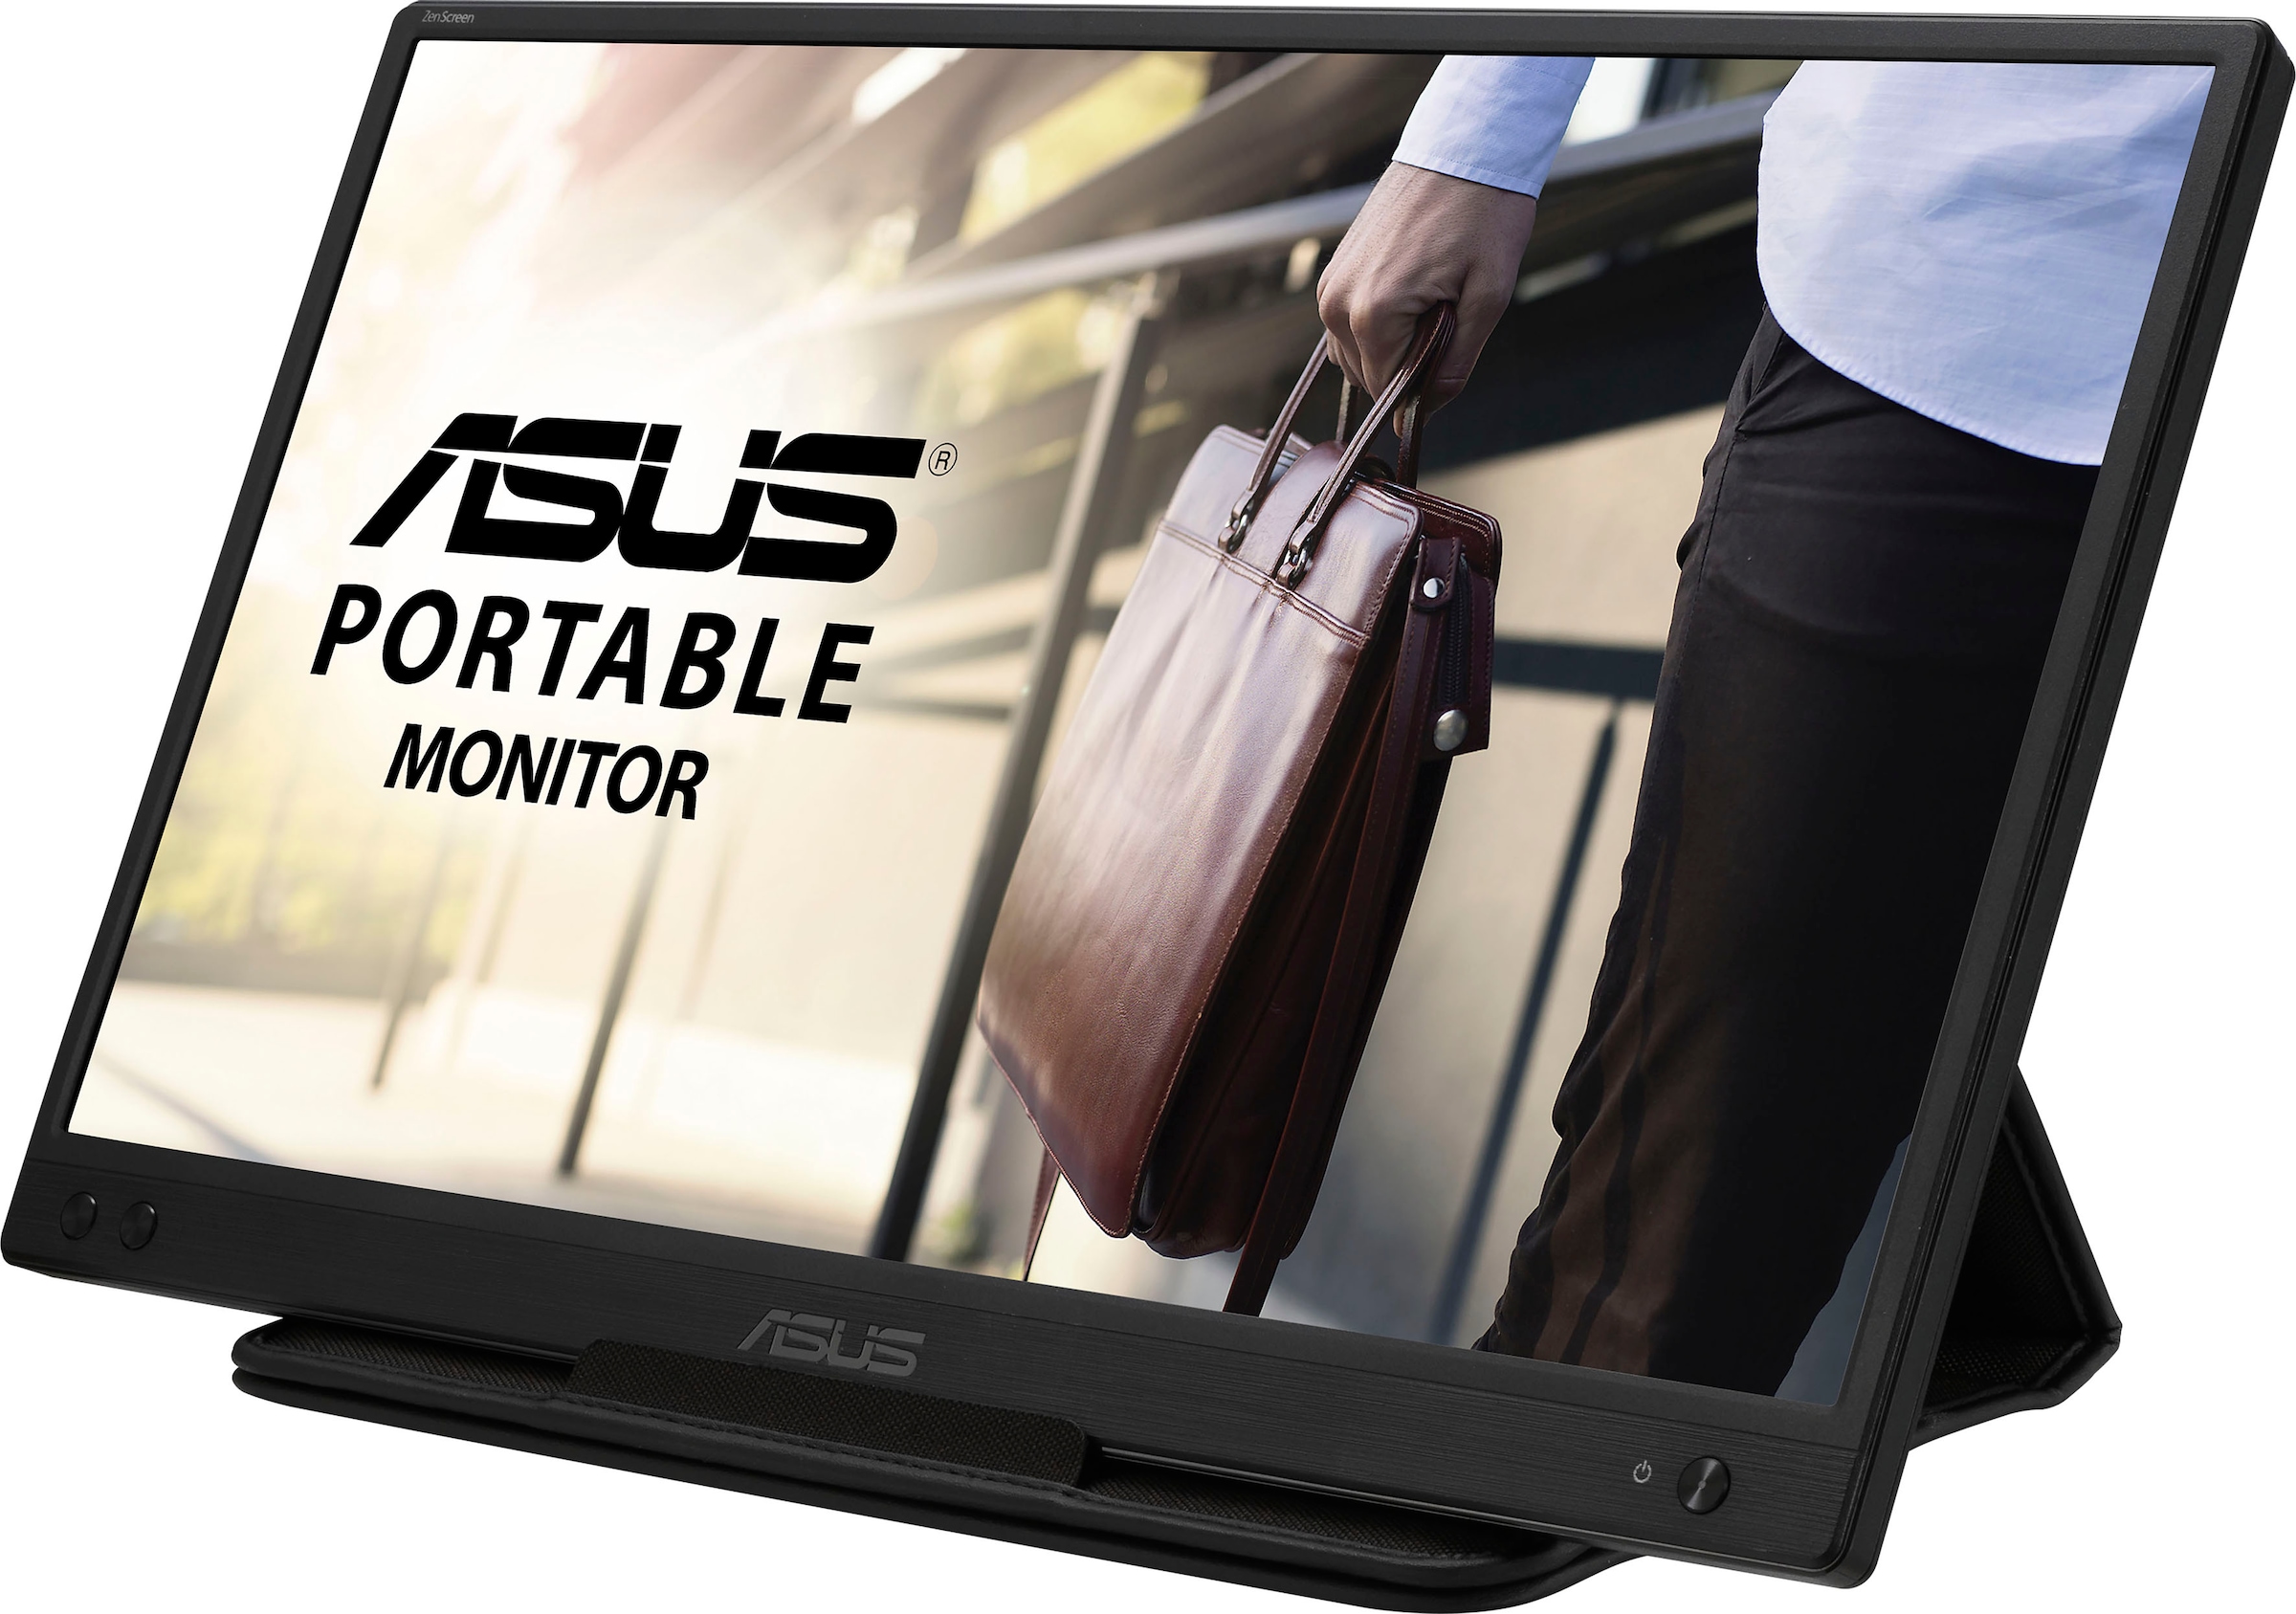 Asus Portabler Monitor »MB166C«, 40 cm/16 Zoll, 1920 x 1080 px, Full HD, 5 ms Reaktionszeit, 60 Hz